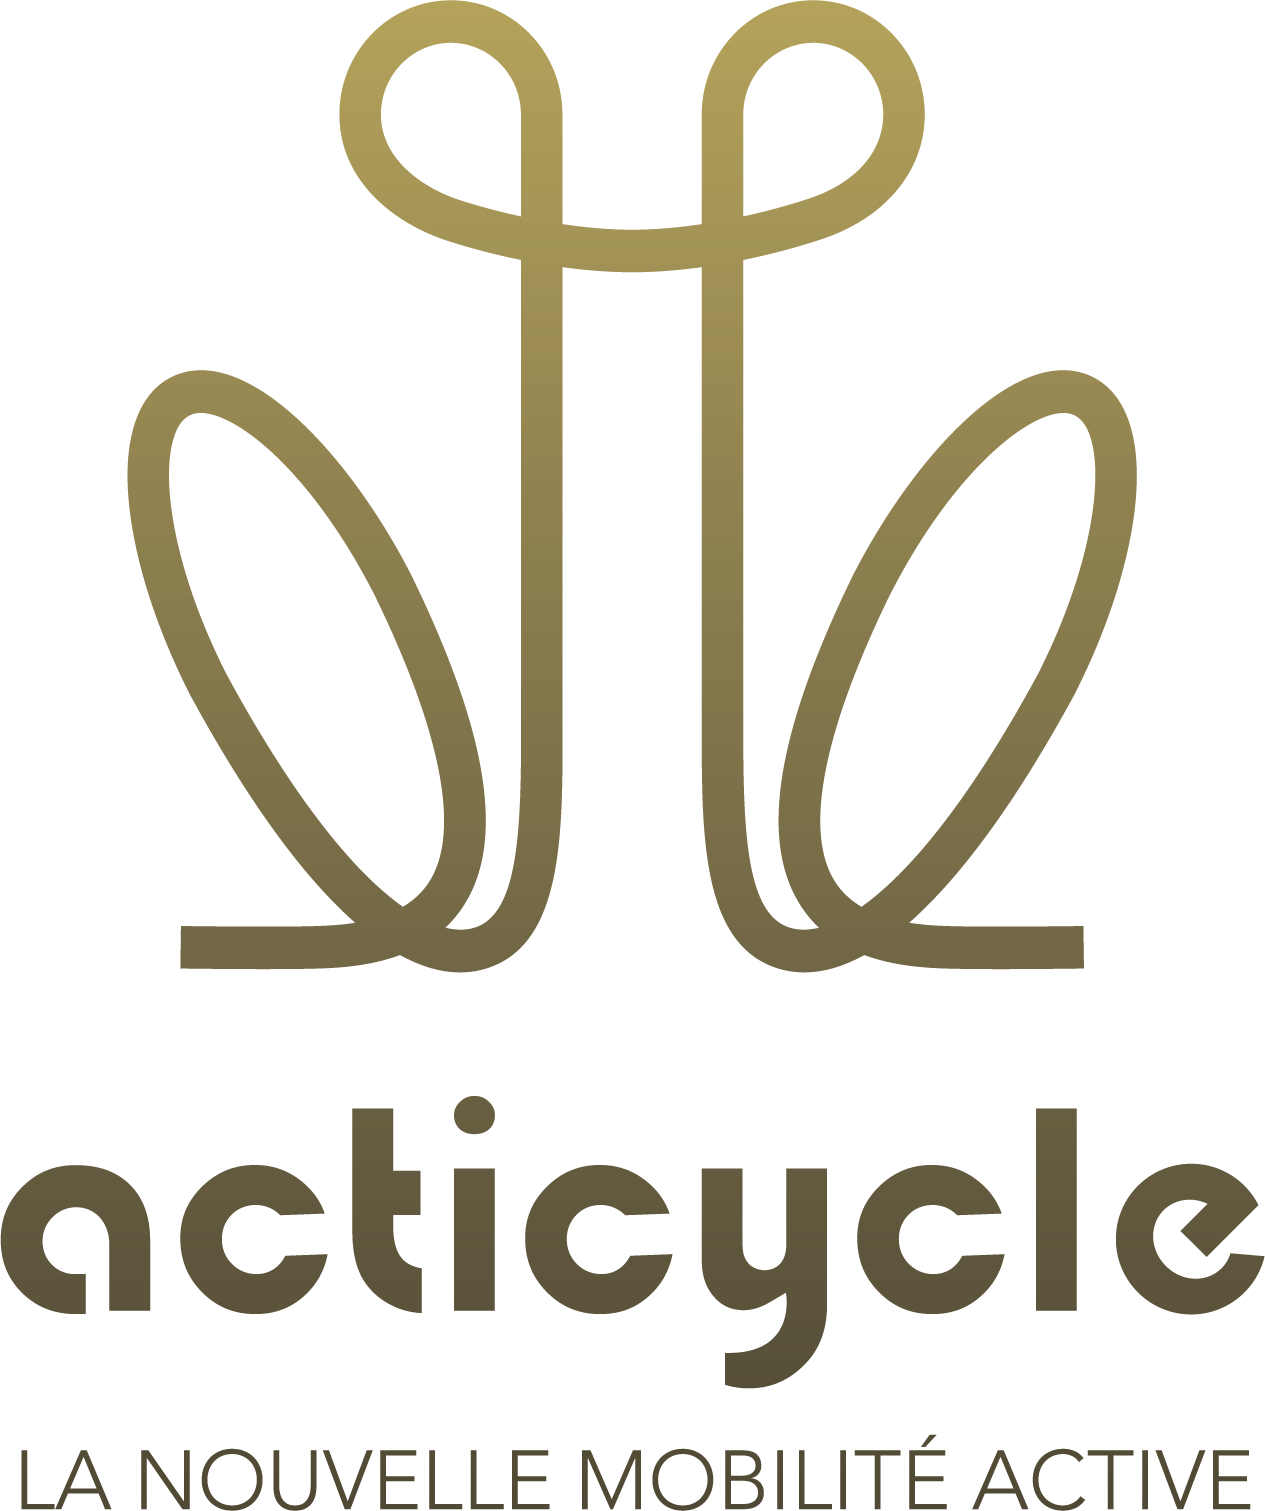 ACTICYCLE